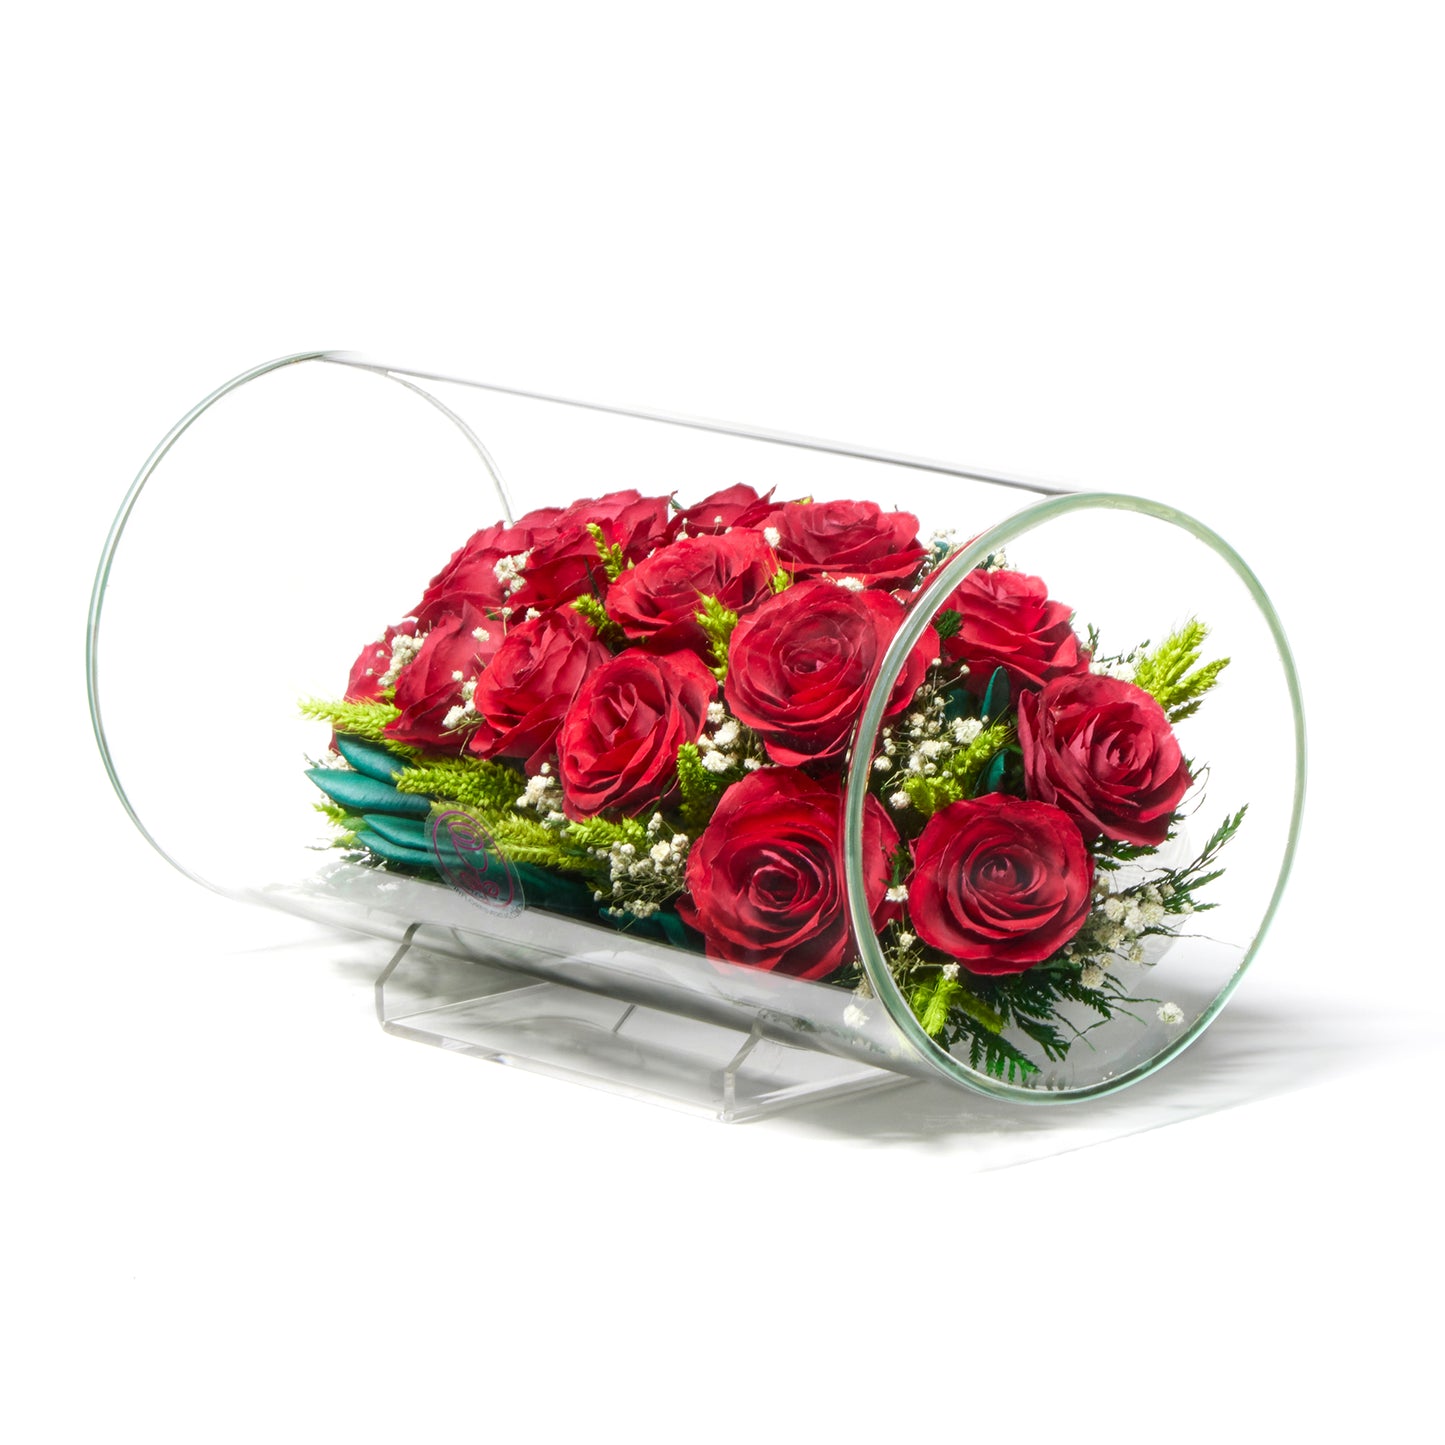 In Flores Veritas: Rose Radiance Horizontal Tube Vase - Lasts up to 5 Years - Elegant Gift for Any Occasion